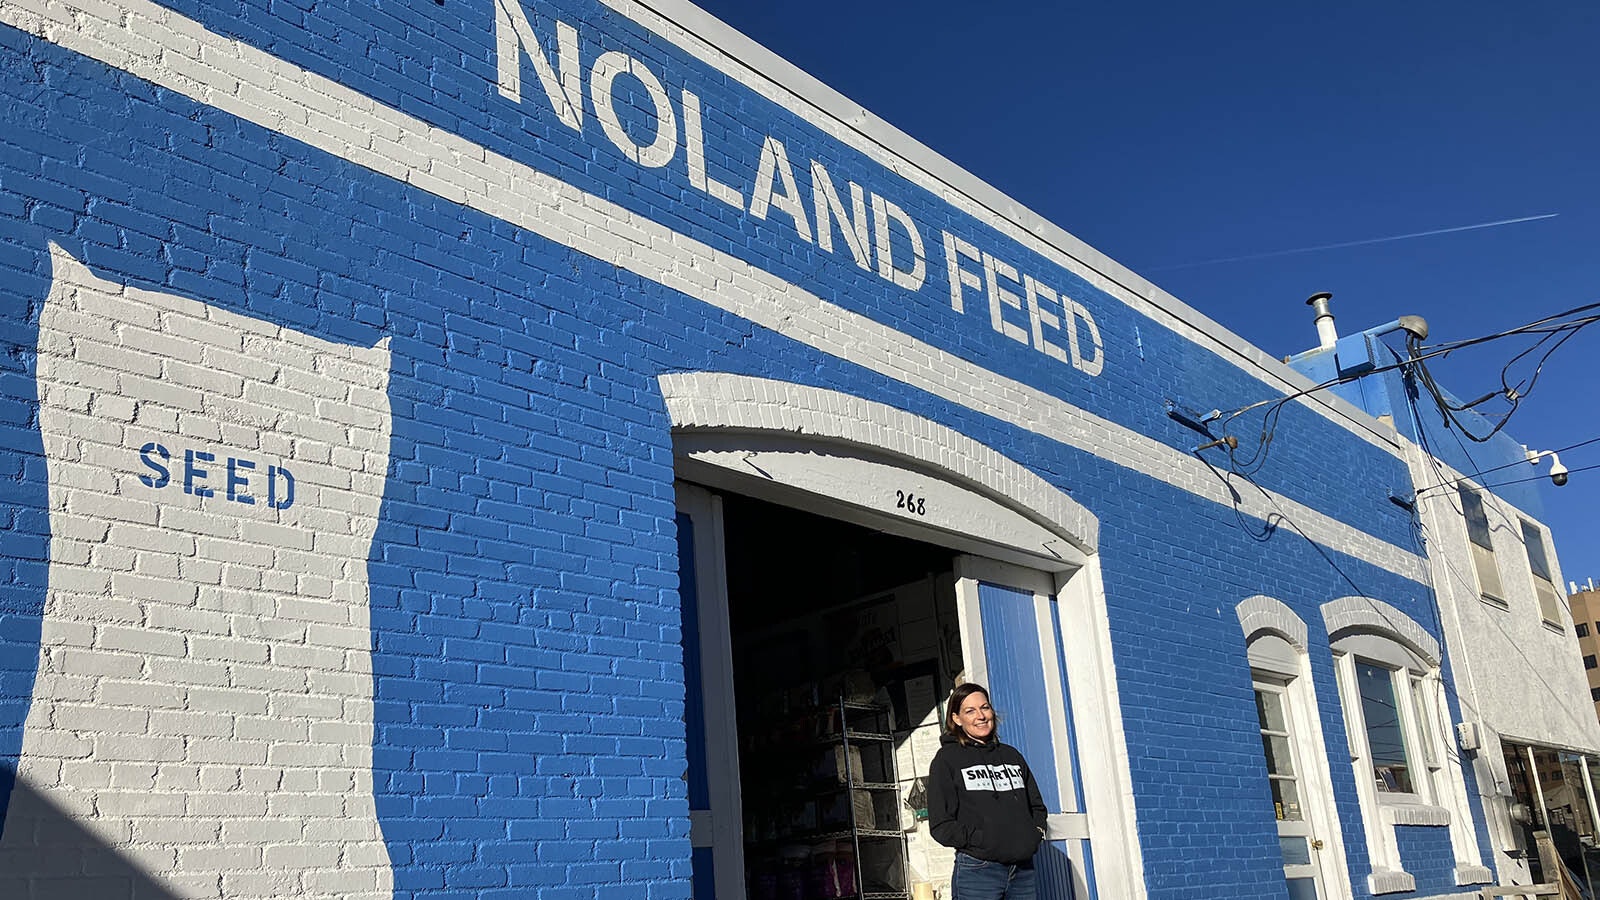 Noland Feed at 268 Industrial Ave. on the west side of Casper’s downtown, with owner Jamie Haigler.